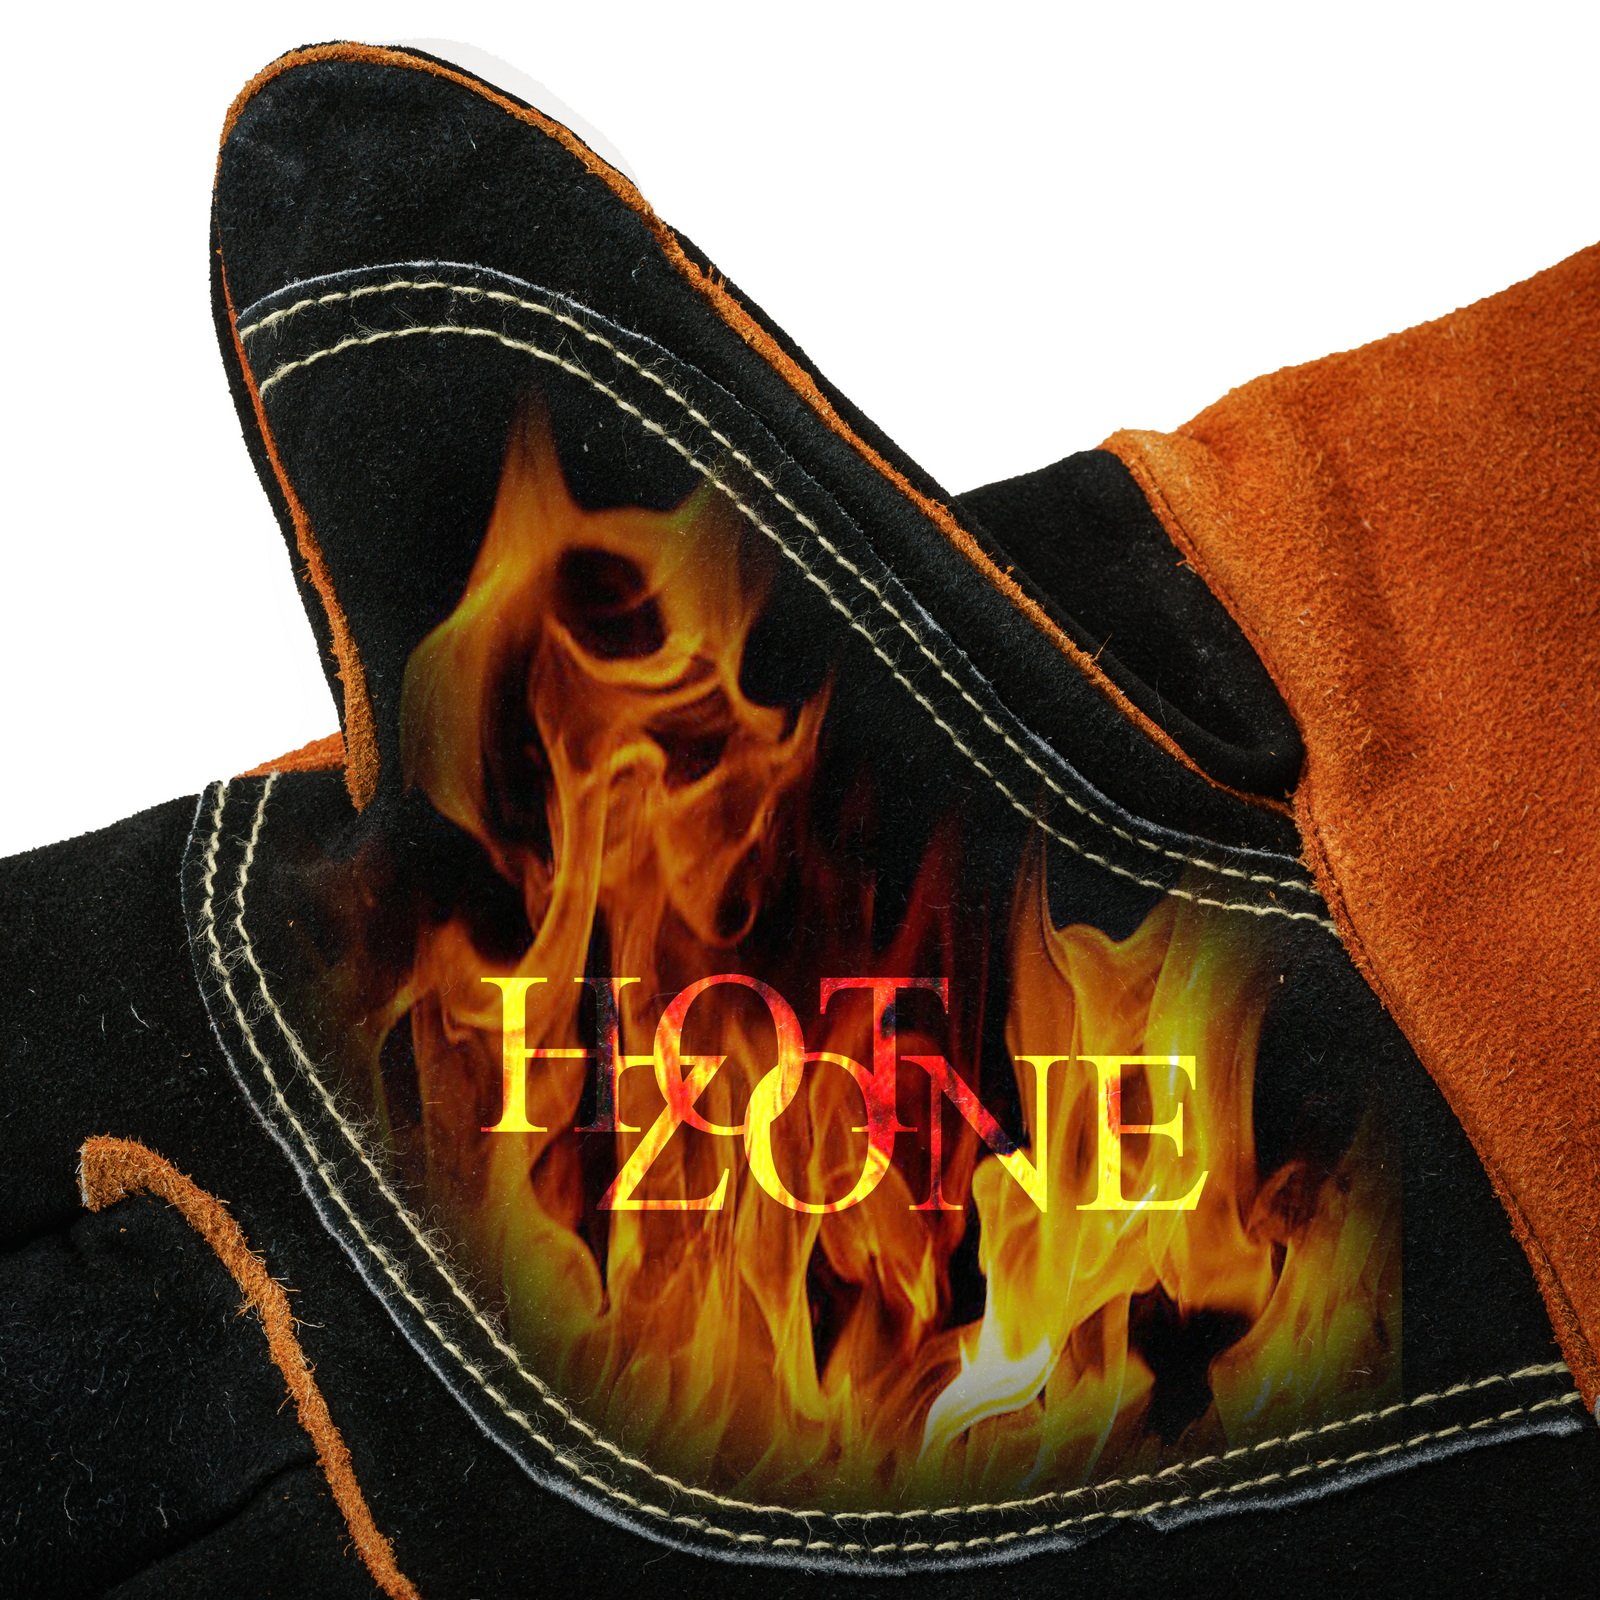 BLACK FOREST FOX Grillhandschuhe Pro 300 feuerfeste Aramid Grillhandschuhe, (Set), Ultra-Orange ultra orange | Grillhandschuhe